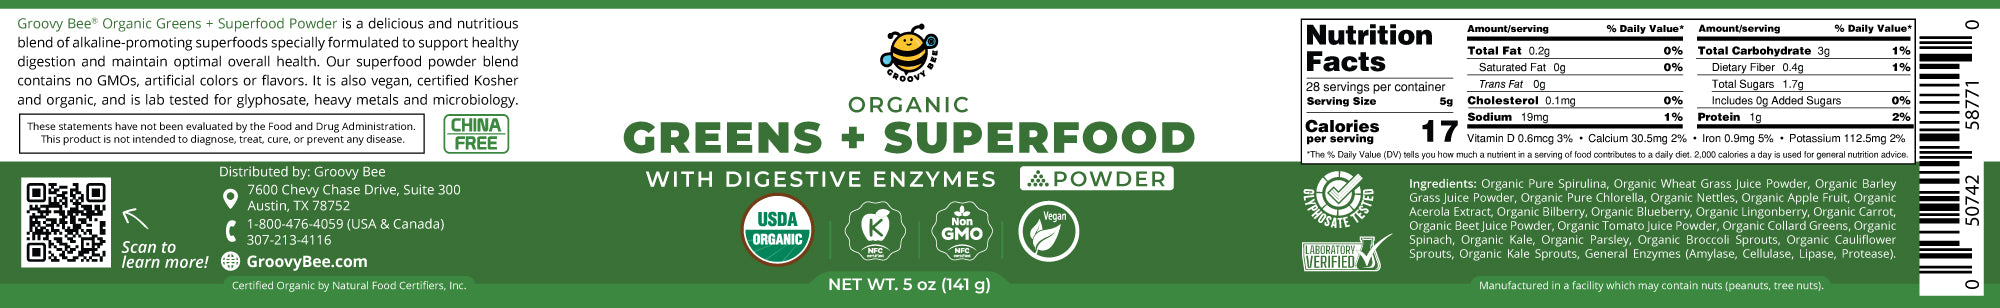 Organic Greens + Superfood Powder With Digestive Enzymes 5 oz (141 g) (6-Pack)